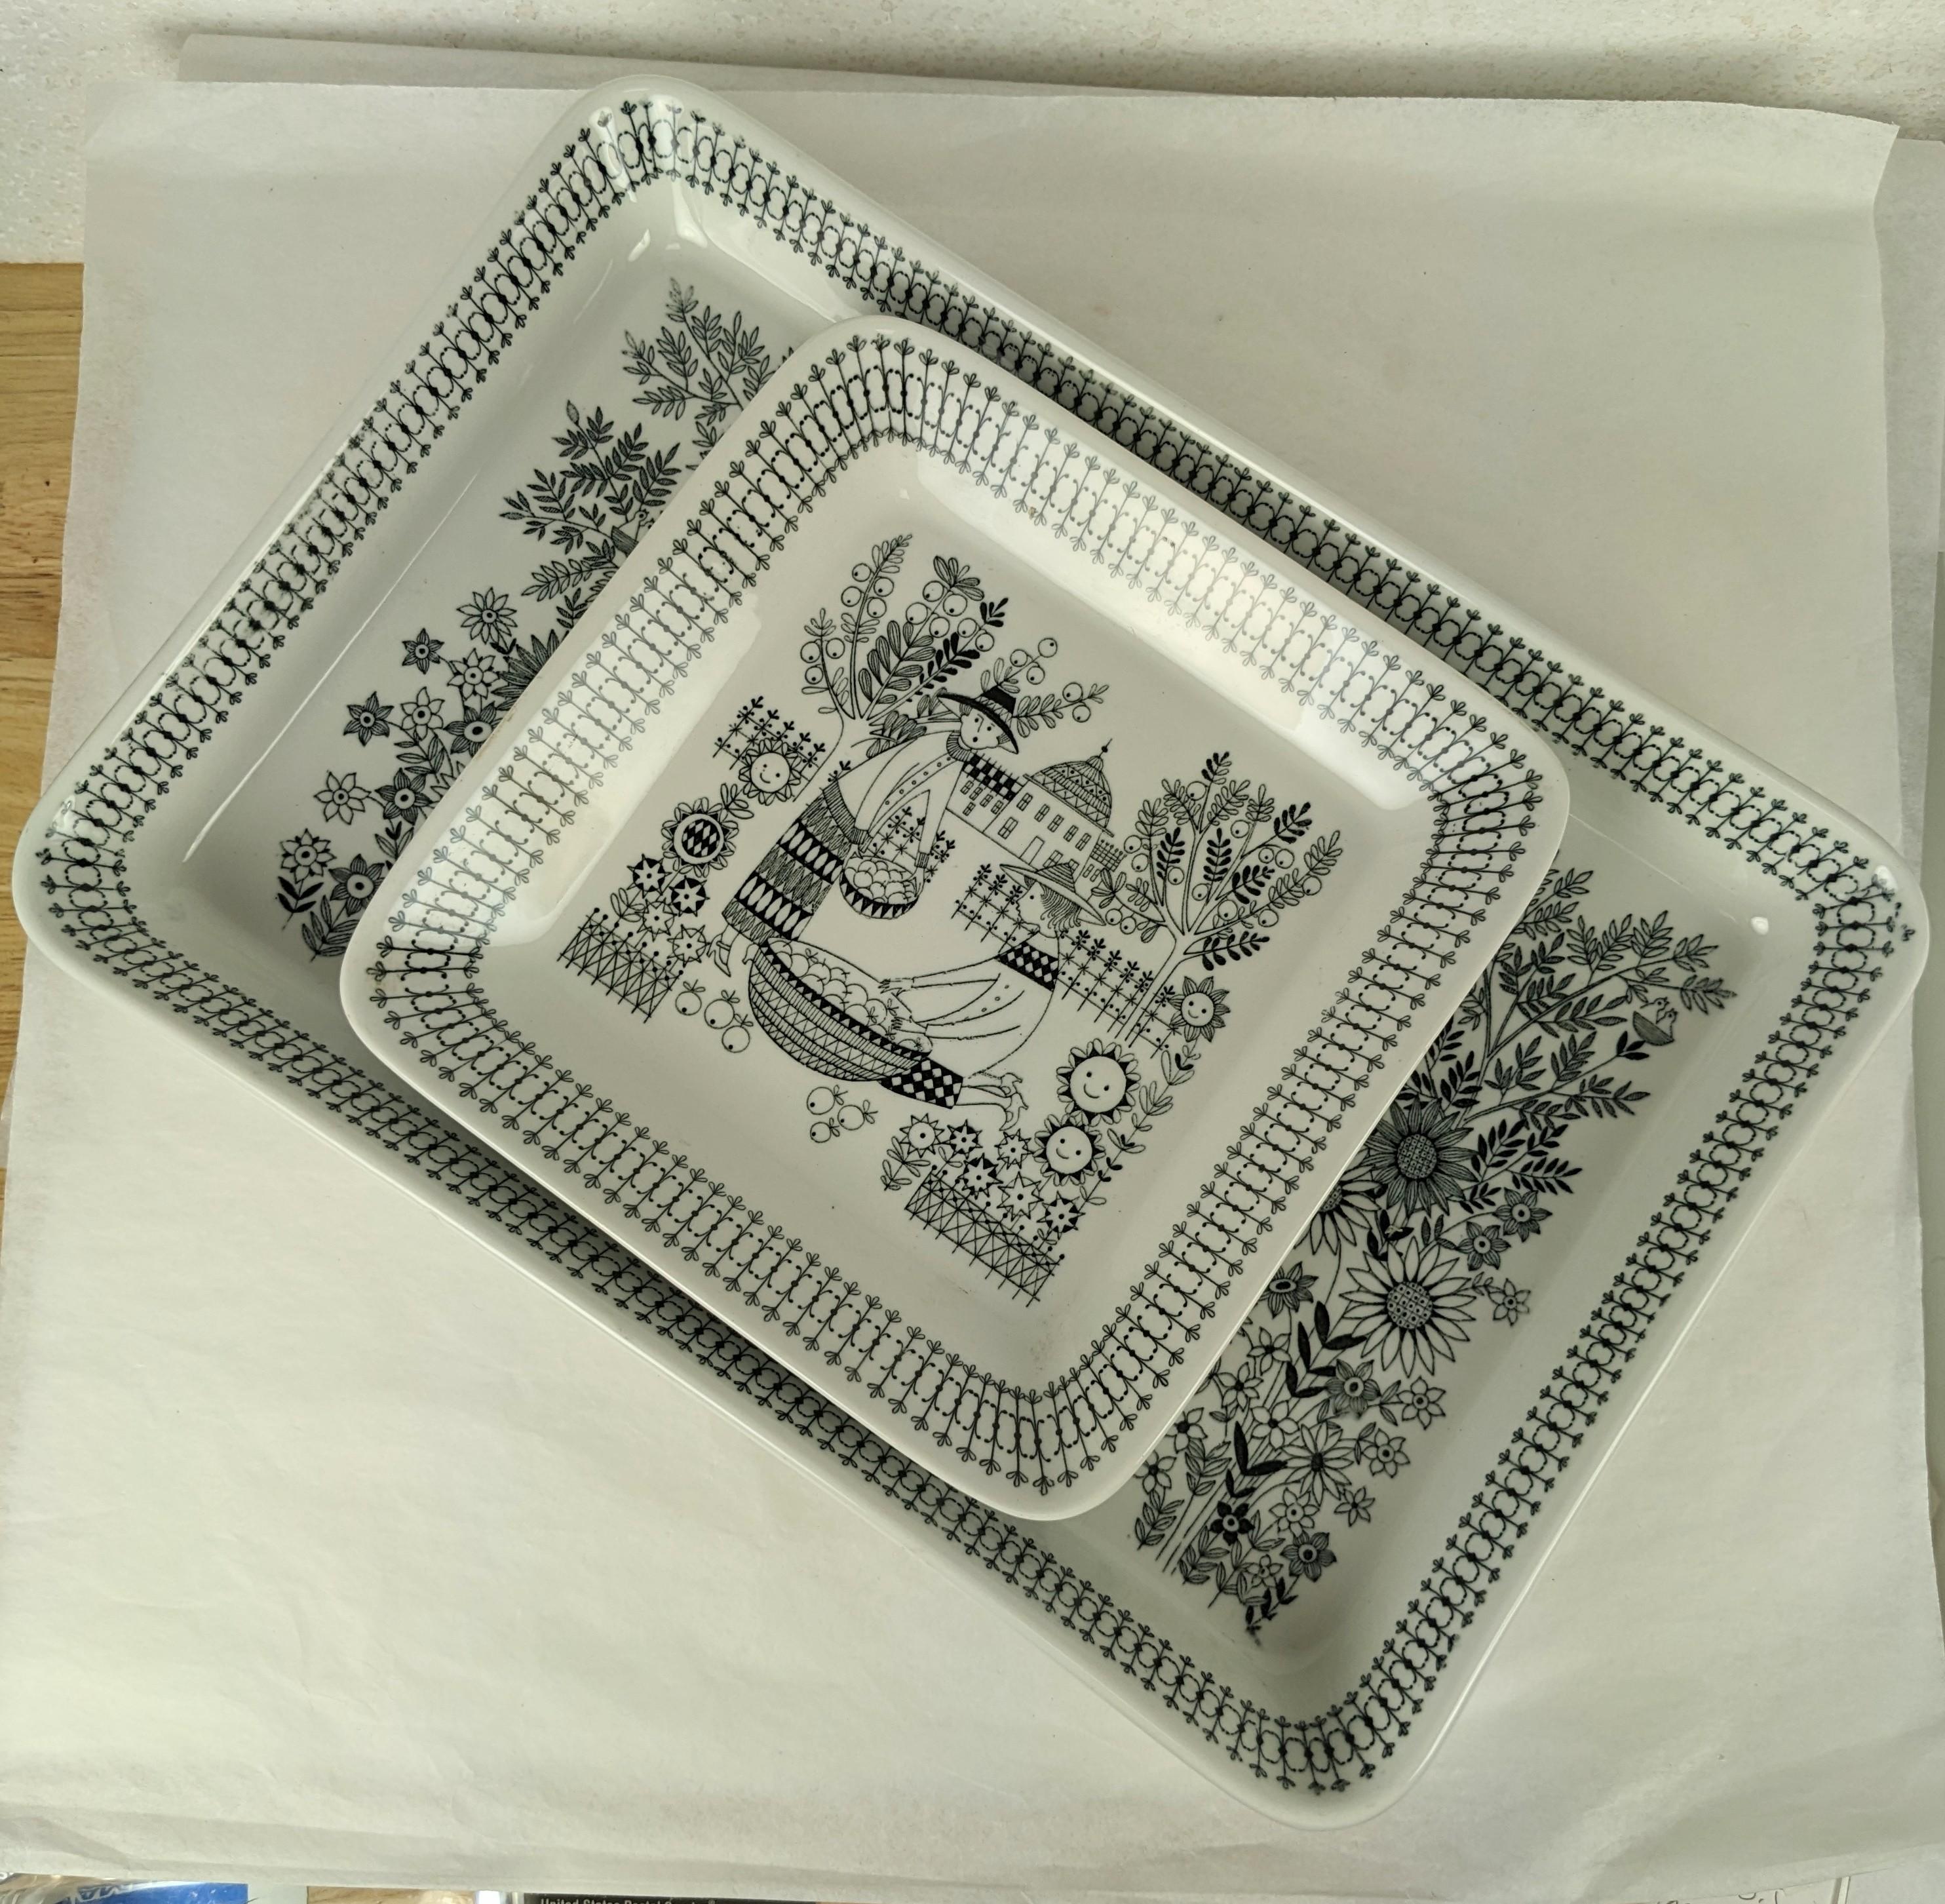 Pair of charming serving dishes by Arabia of Finland. One is a rectangular platter Emilia Pattern Tea Party, the other being Emilia, Apple Picking With Happy Flowers circa 1950's. Large 12